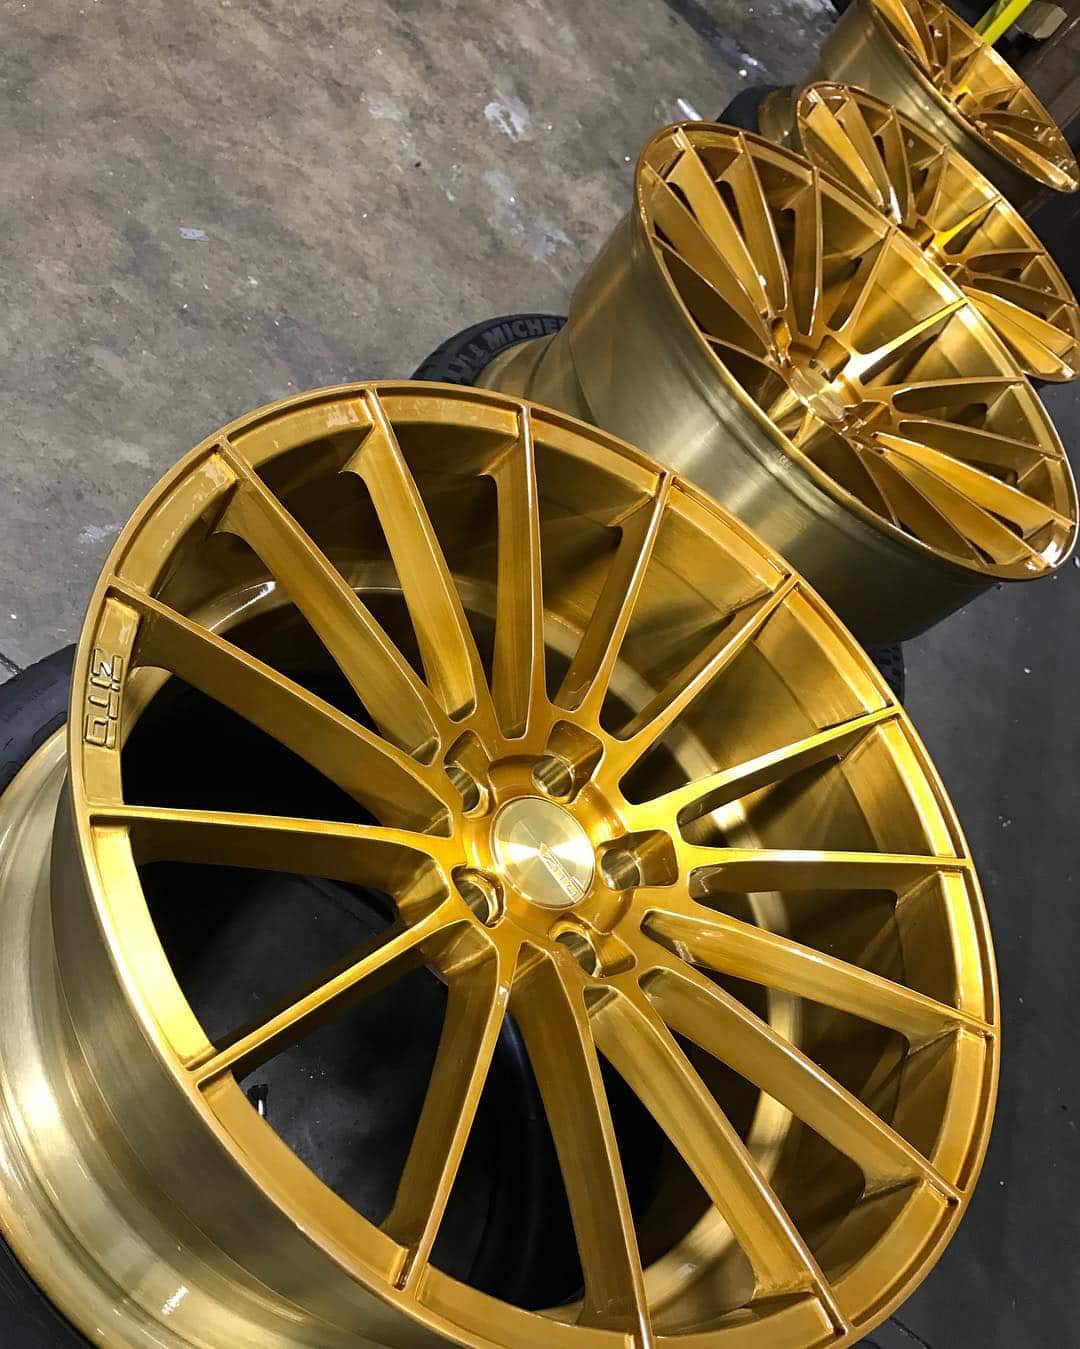 zito-zs15-brushed-gold-concave-wheels.jpg